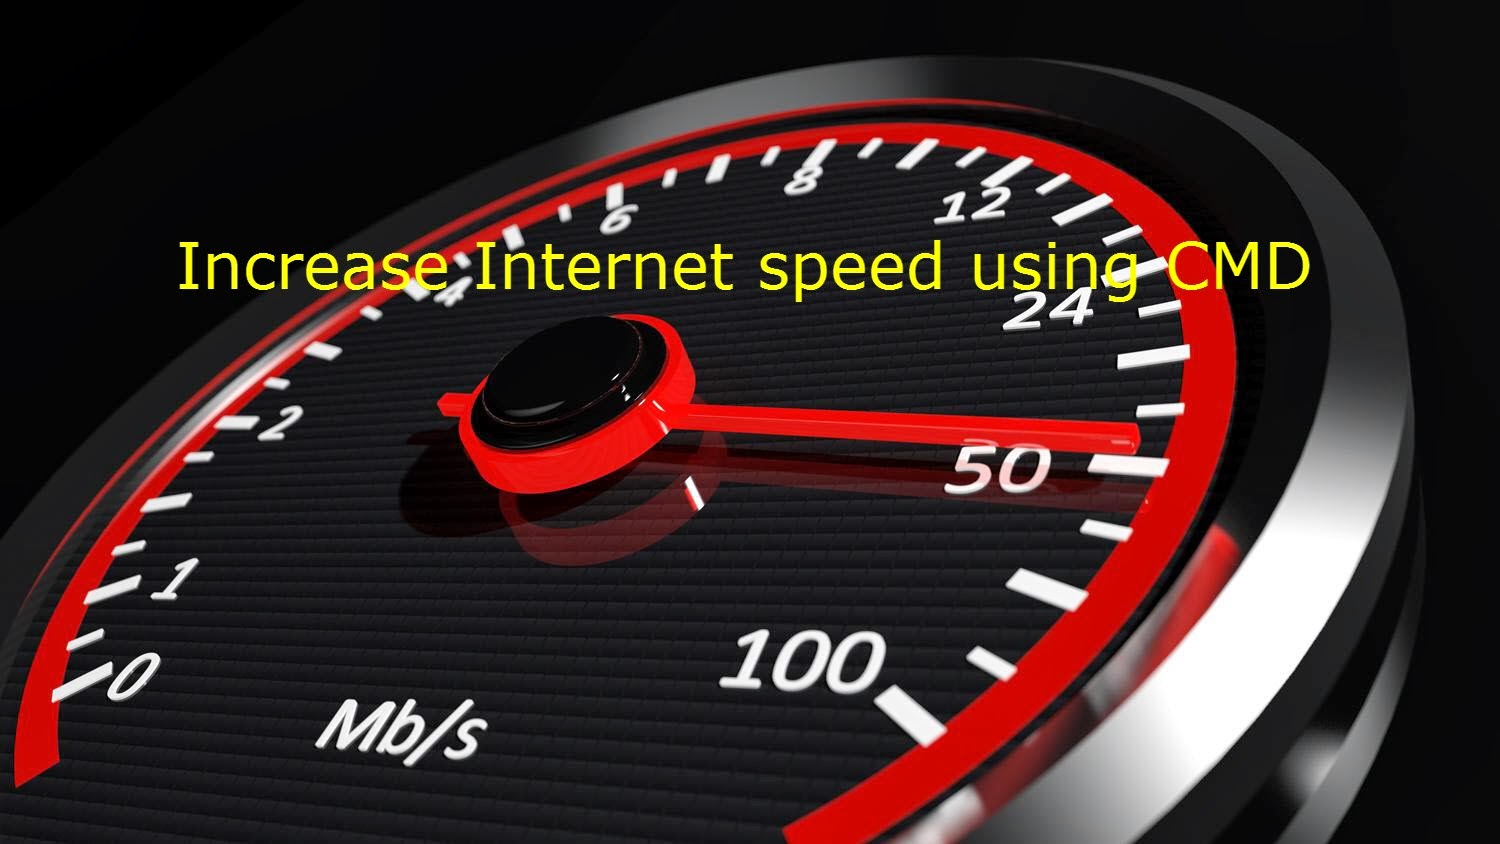 How to increase internet speed using cmd